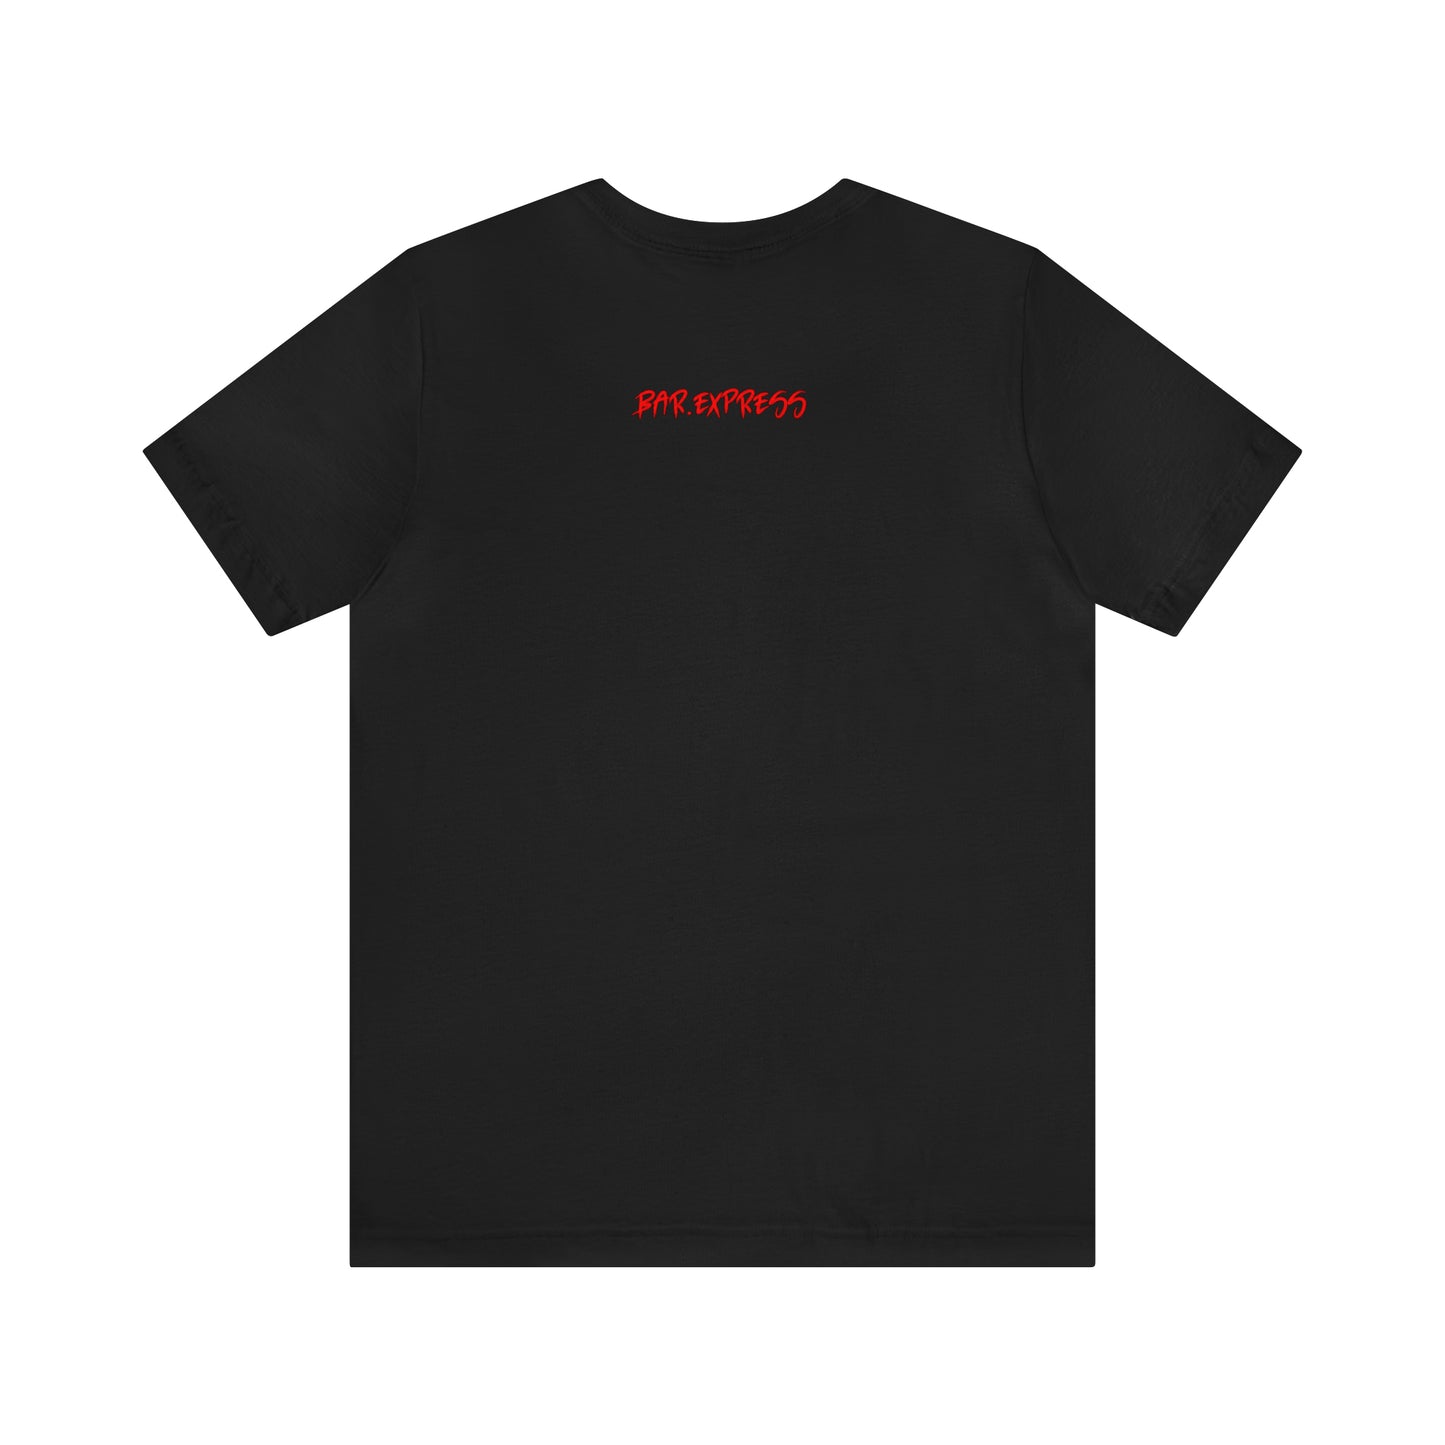 BarExpress NYC Rush Tee: In a NY Minute